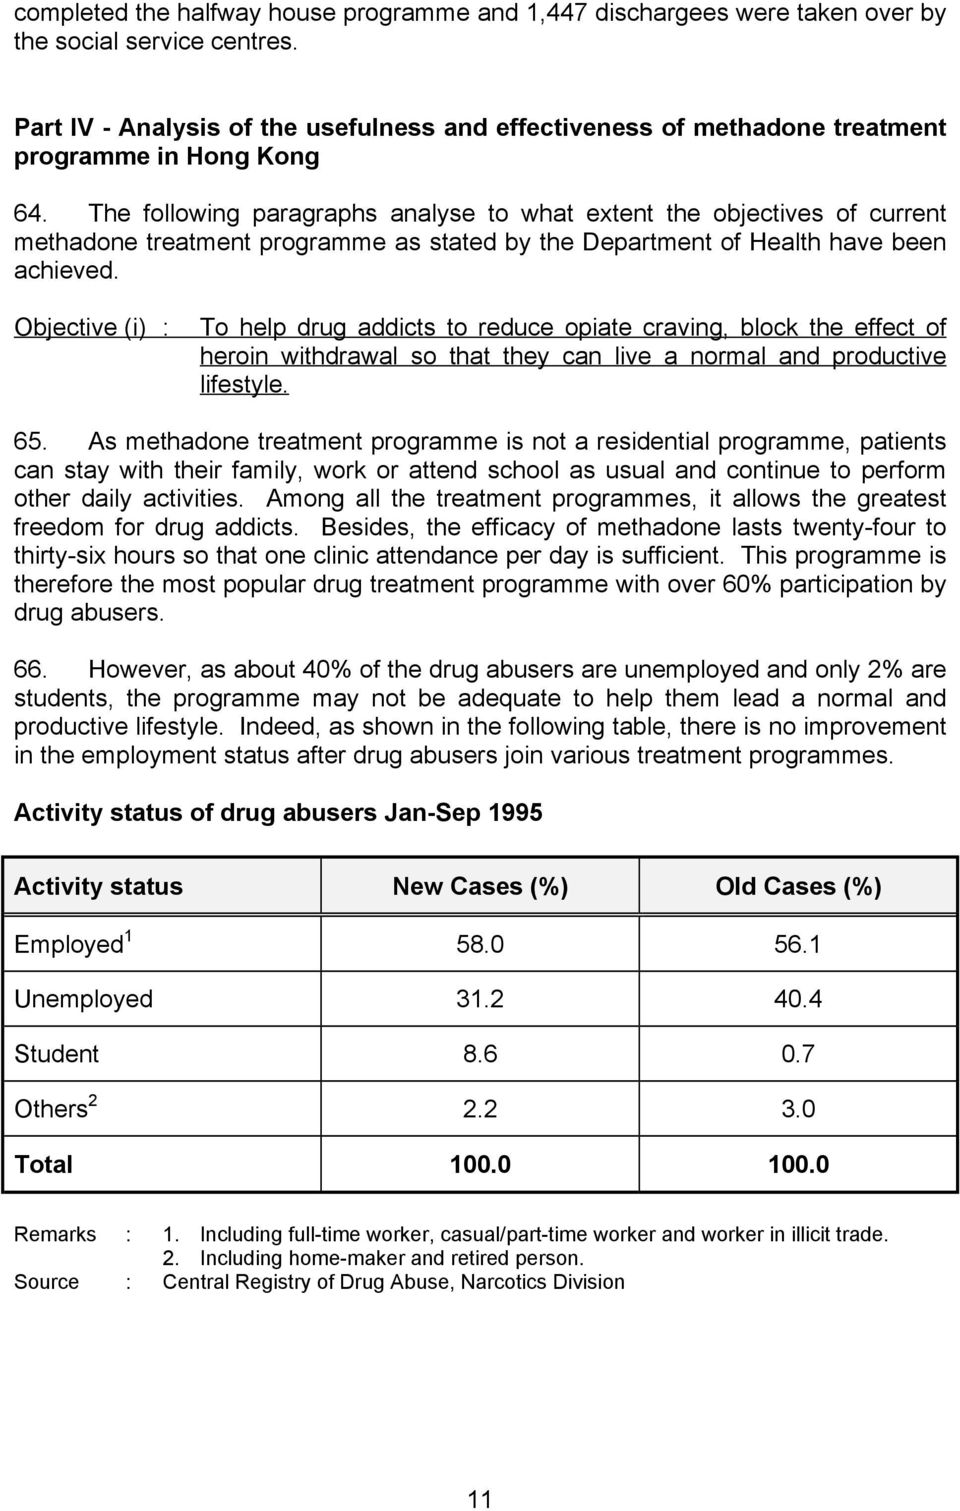 The following paragraphs analyse to what extent the objectives of current methadone treatment programme as stated by the Department of Health have been achieved.